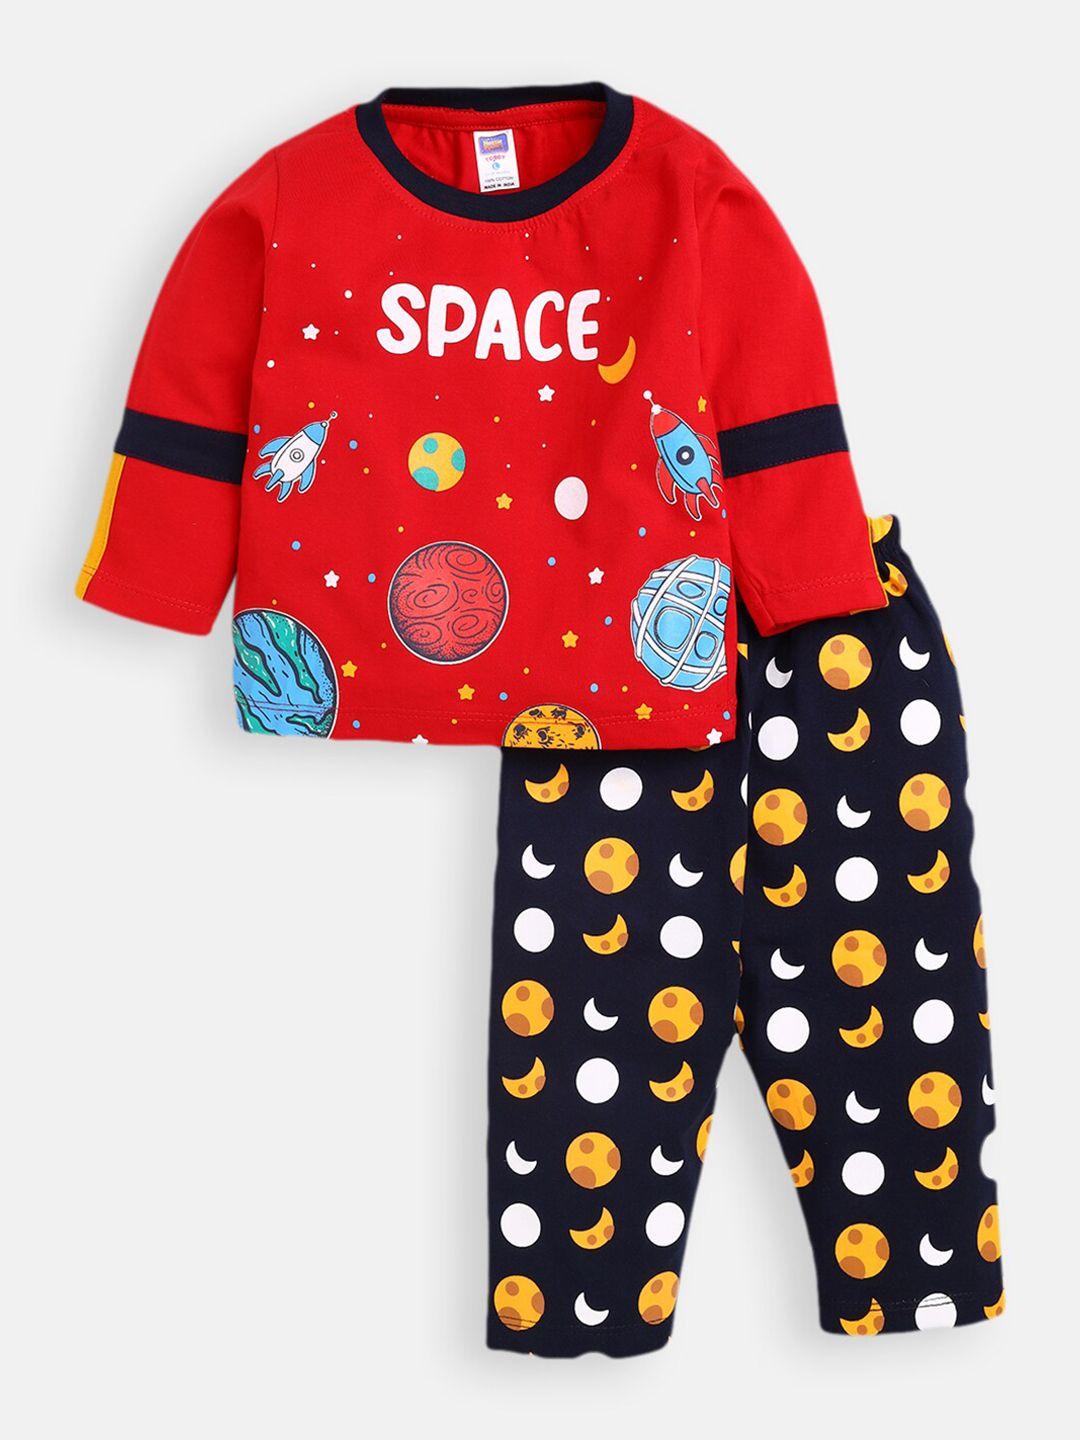 Nottie Planet Boys Red & Black Space Printed Cotton Clothing Set